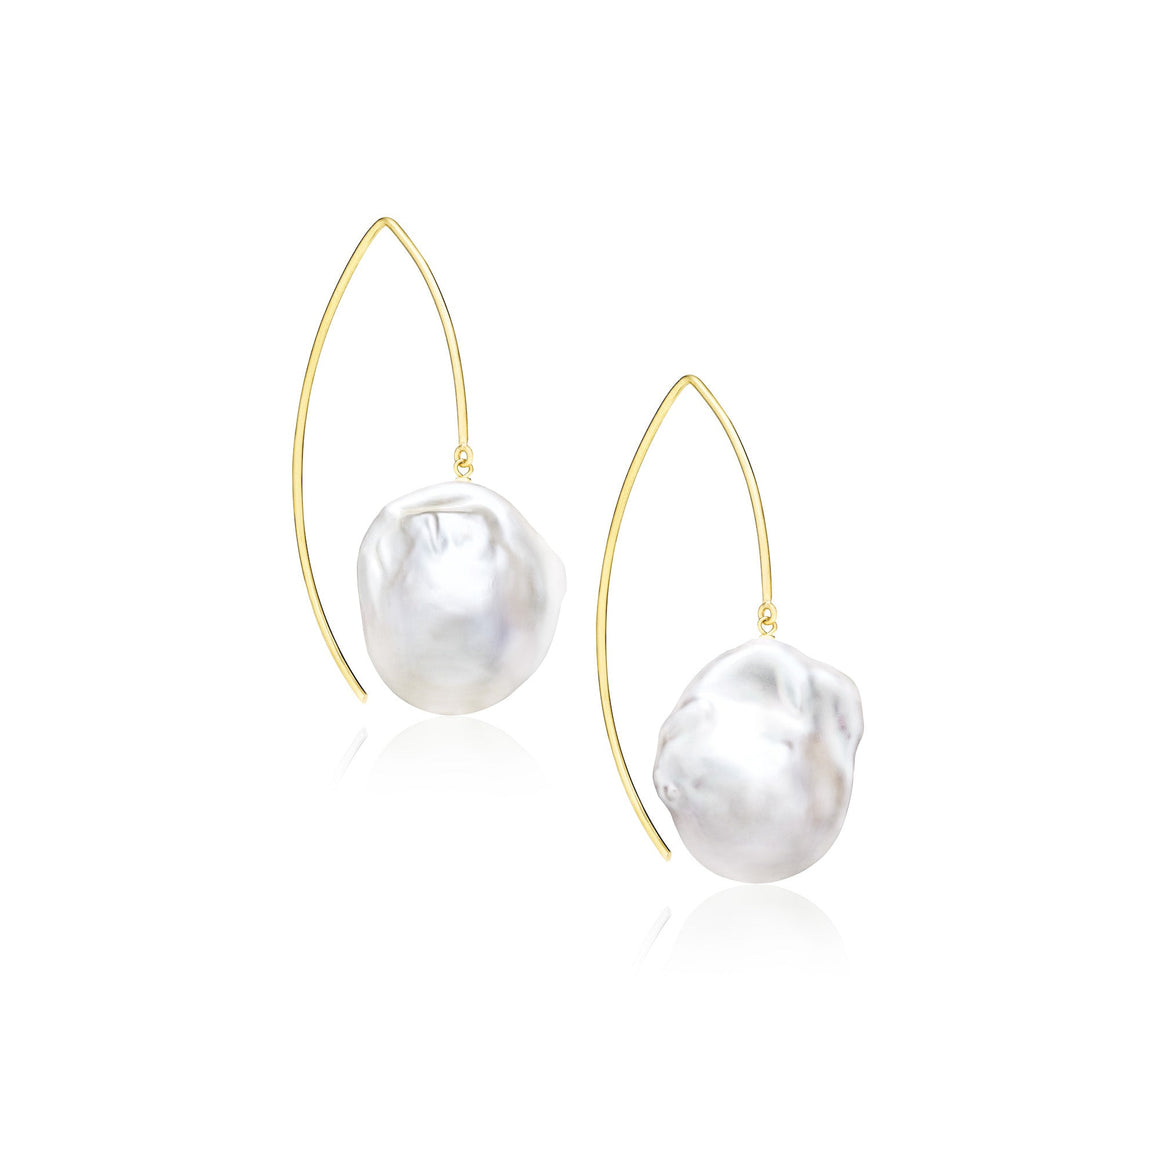 Arc De Triomphe Large White Baroque Freshwater Pearl French Wire Earrings In 14K Gold -Filled